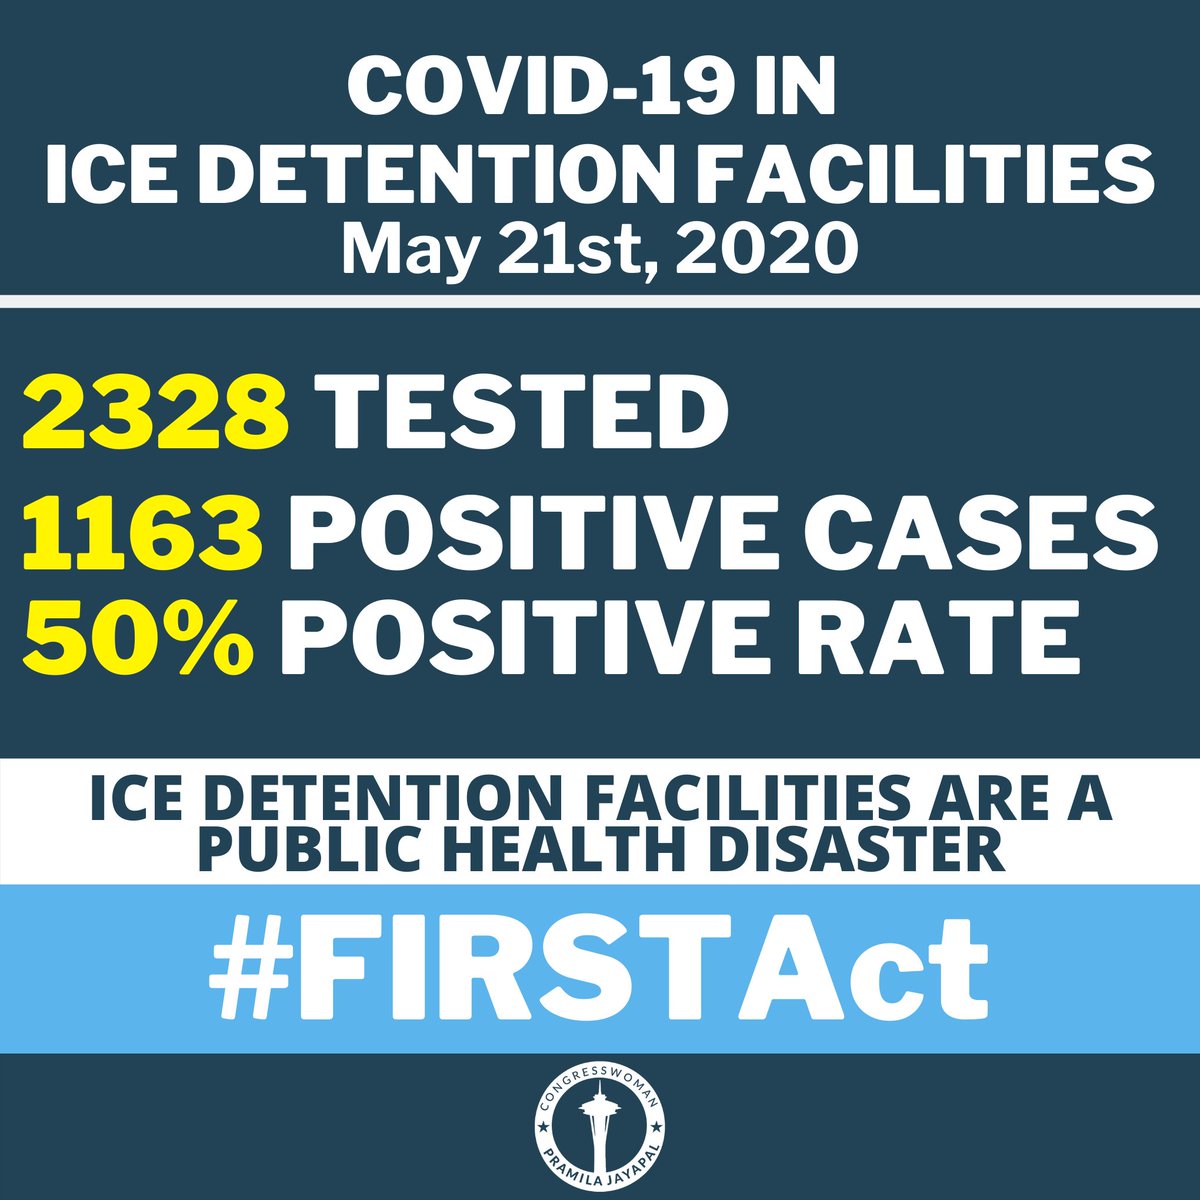 Individuals in ICE detention can’t physically distance and, in many cases, lack access to basic hygiene products. Now, there are 1163 cases at a 50% positive test rate. We can’t delay passing my FIRST Act any longer.